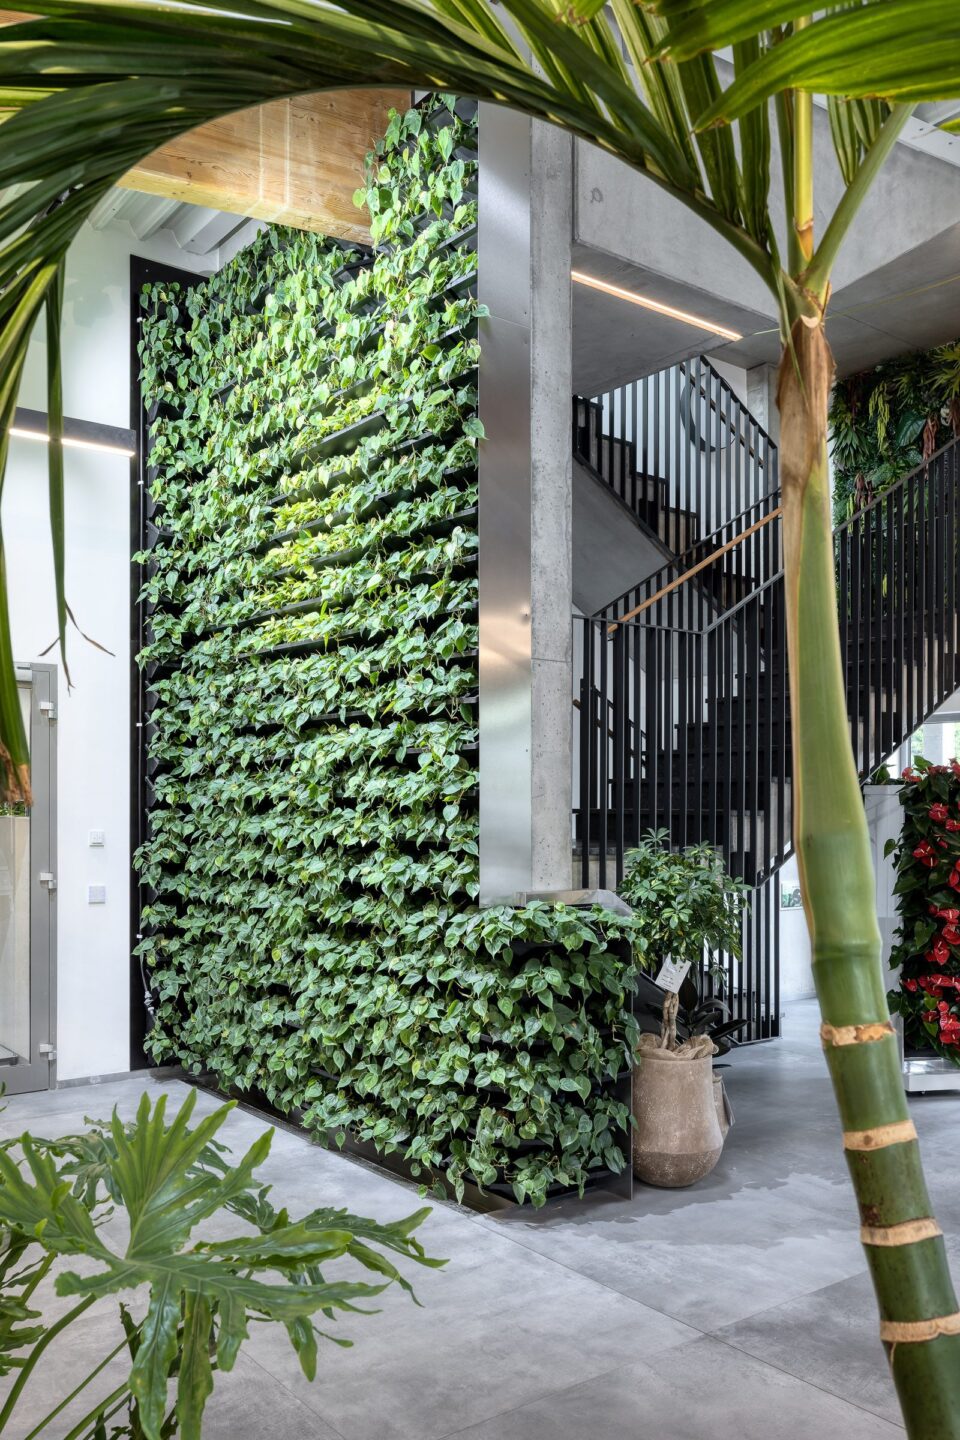 This is an impressive demonstration of how Green Work can improve the working atmosphere and positively influence the indoor climate. The Plant Hall is a bright and friendly space surrounded by photographs and green landscapes